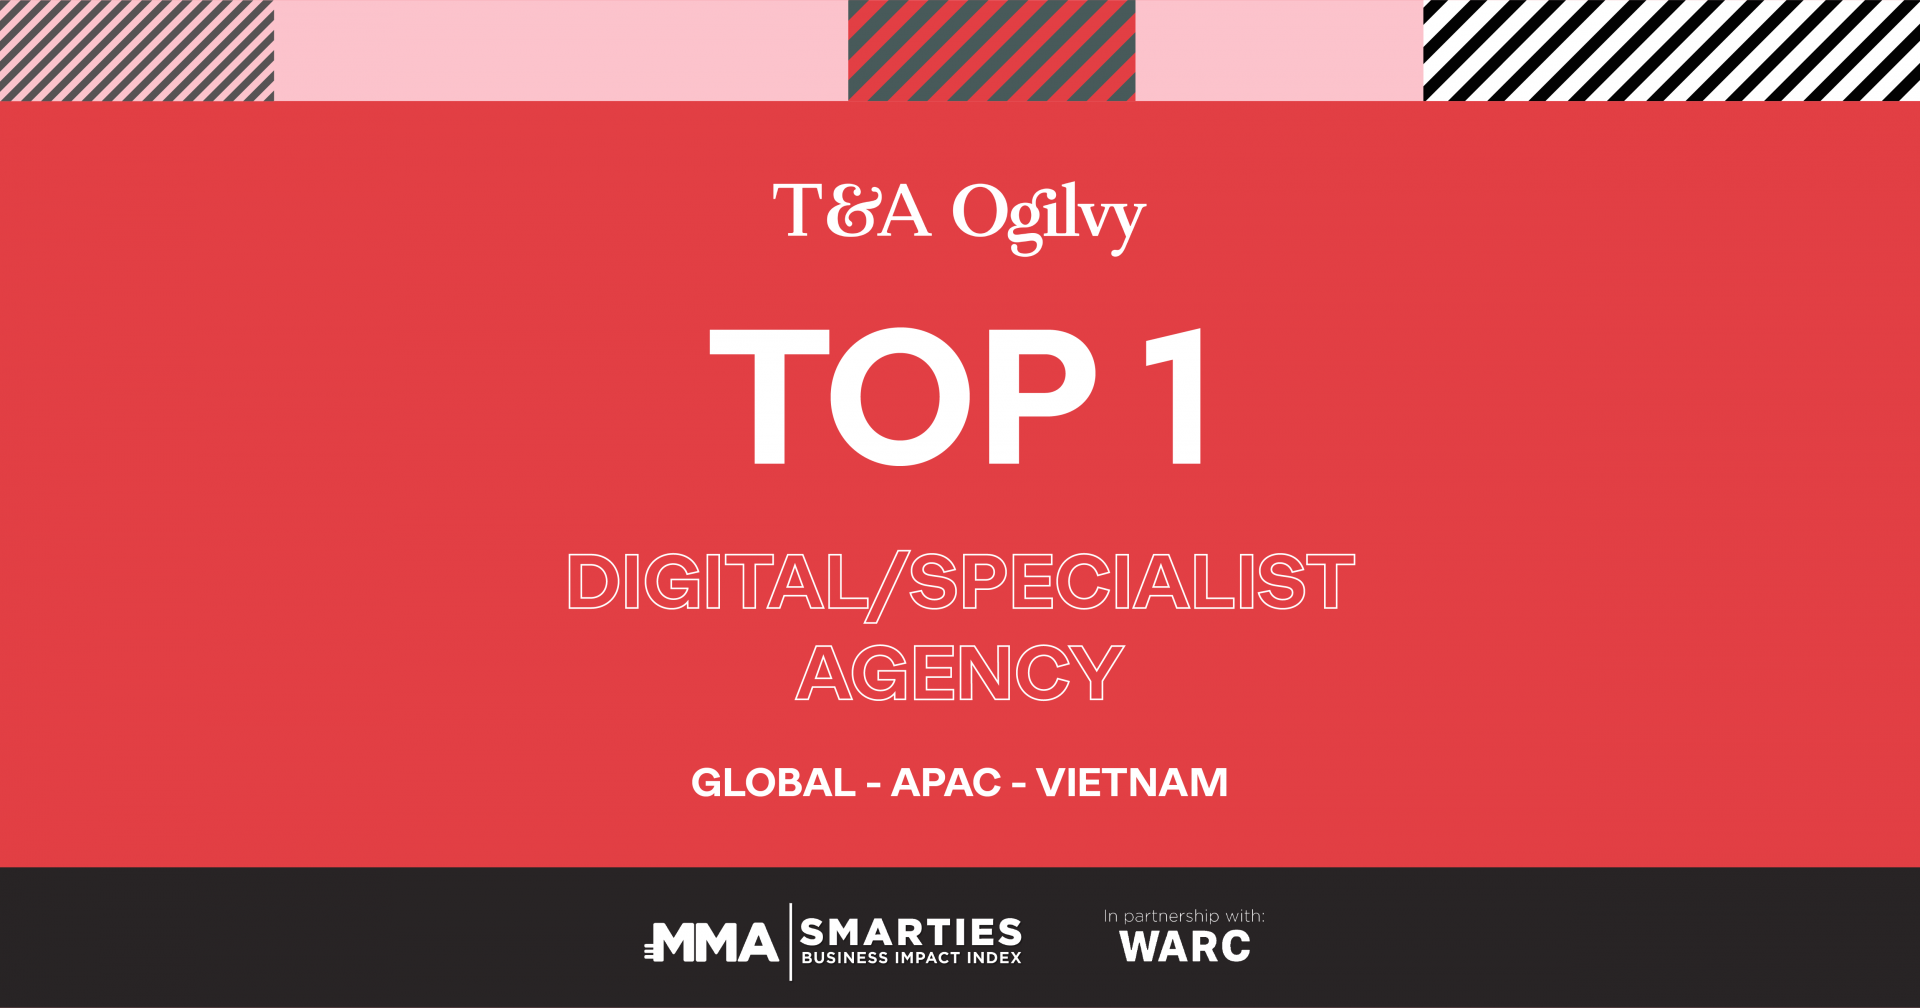 T&A Ogilvy leads Digital/Specialist Agency ranking on SMARTIES Business Impact Index